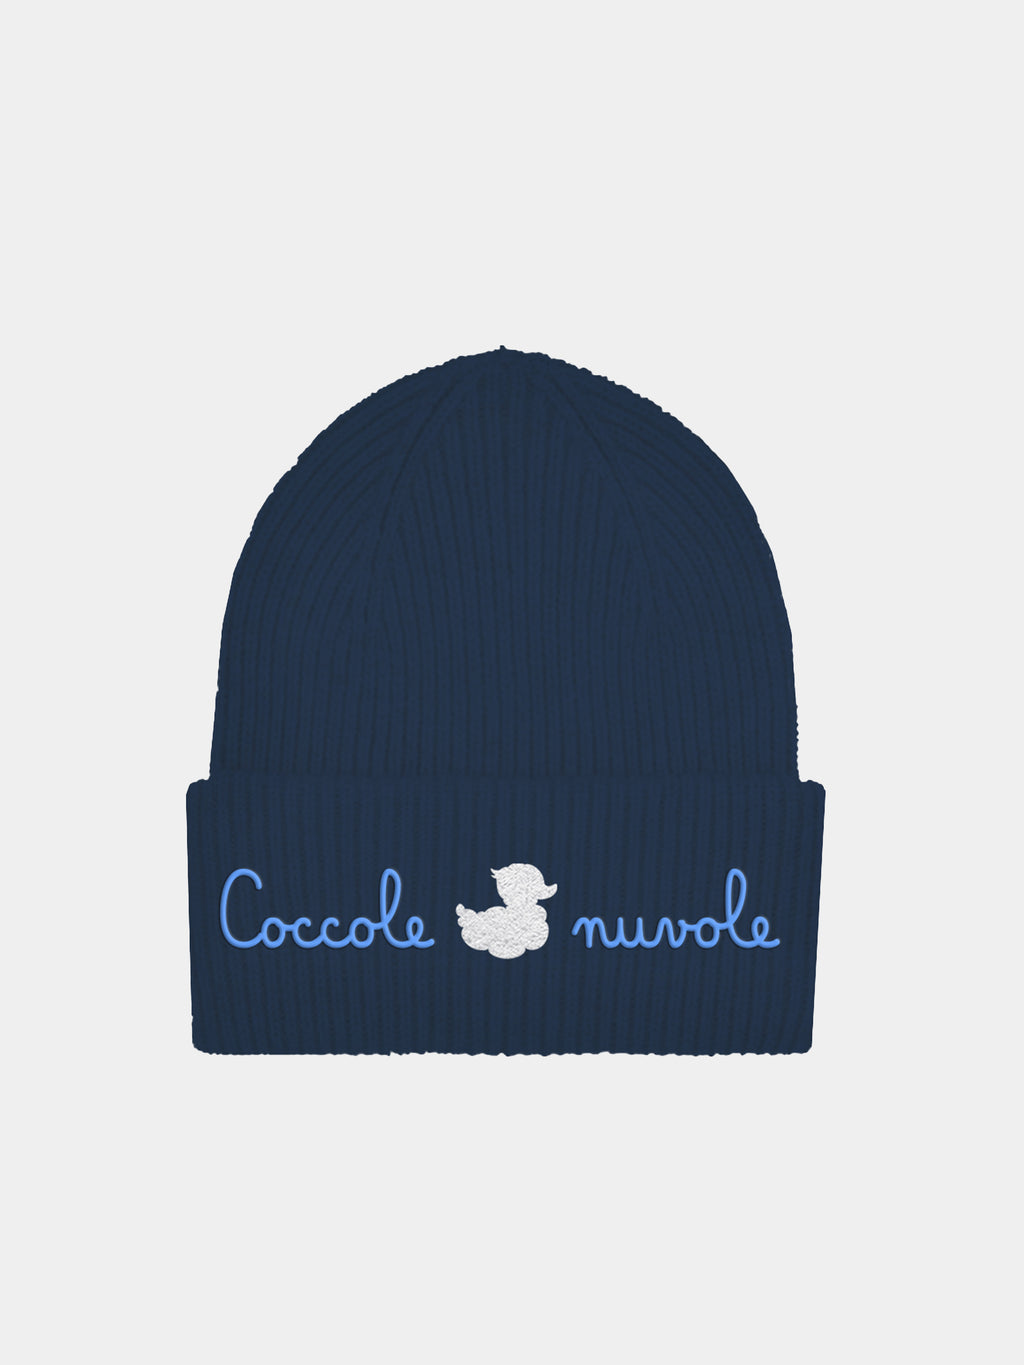 Blue hat for kids with Ducky Clouds